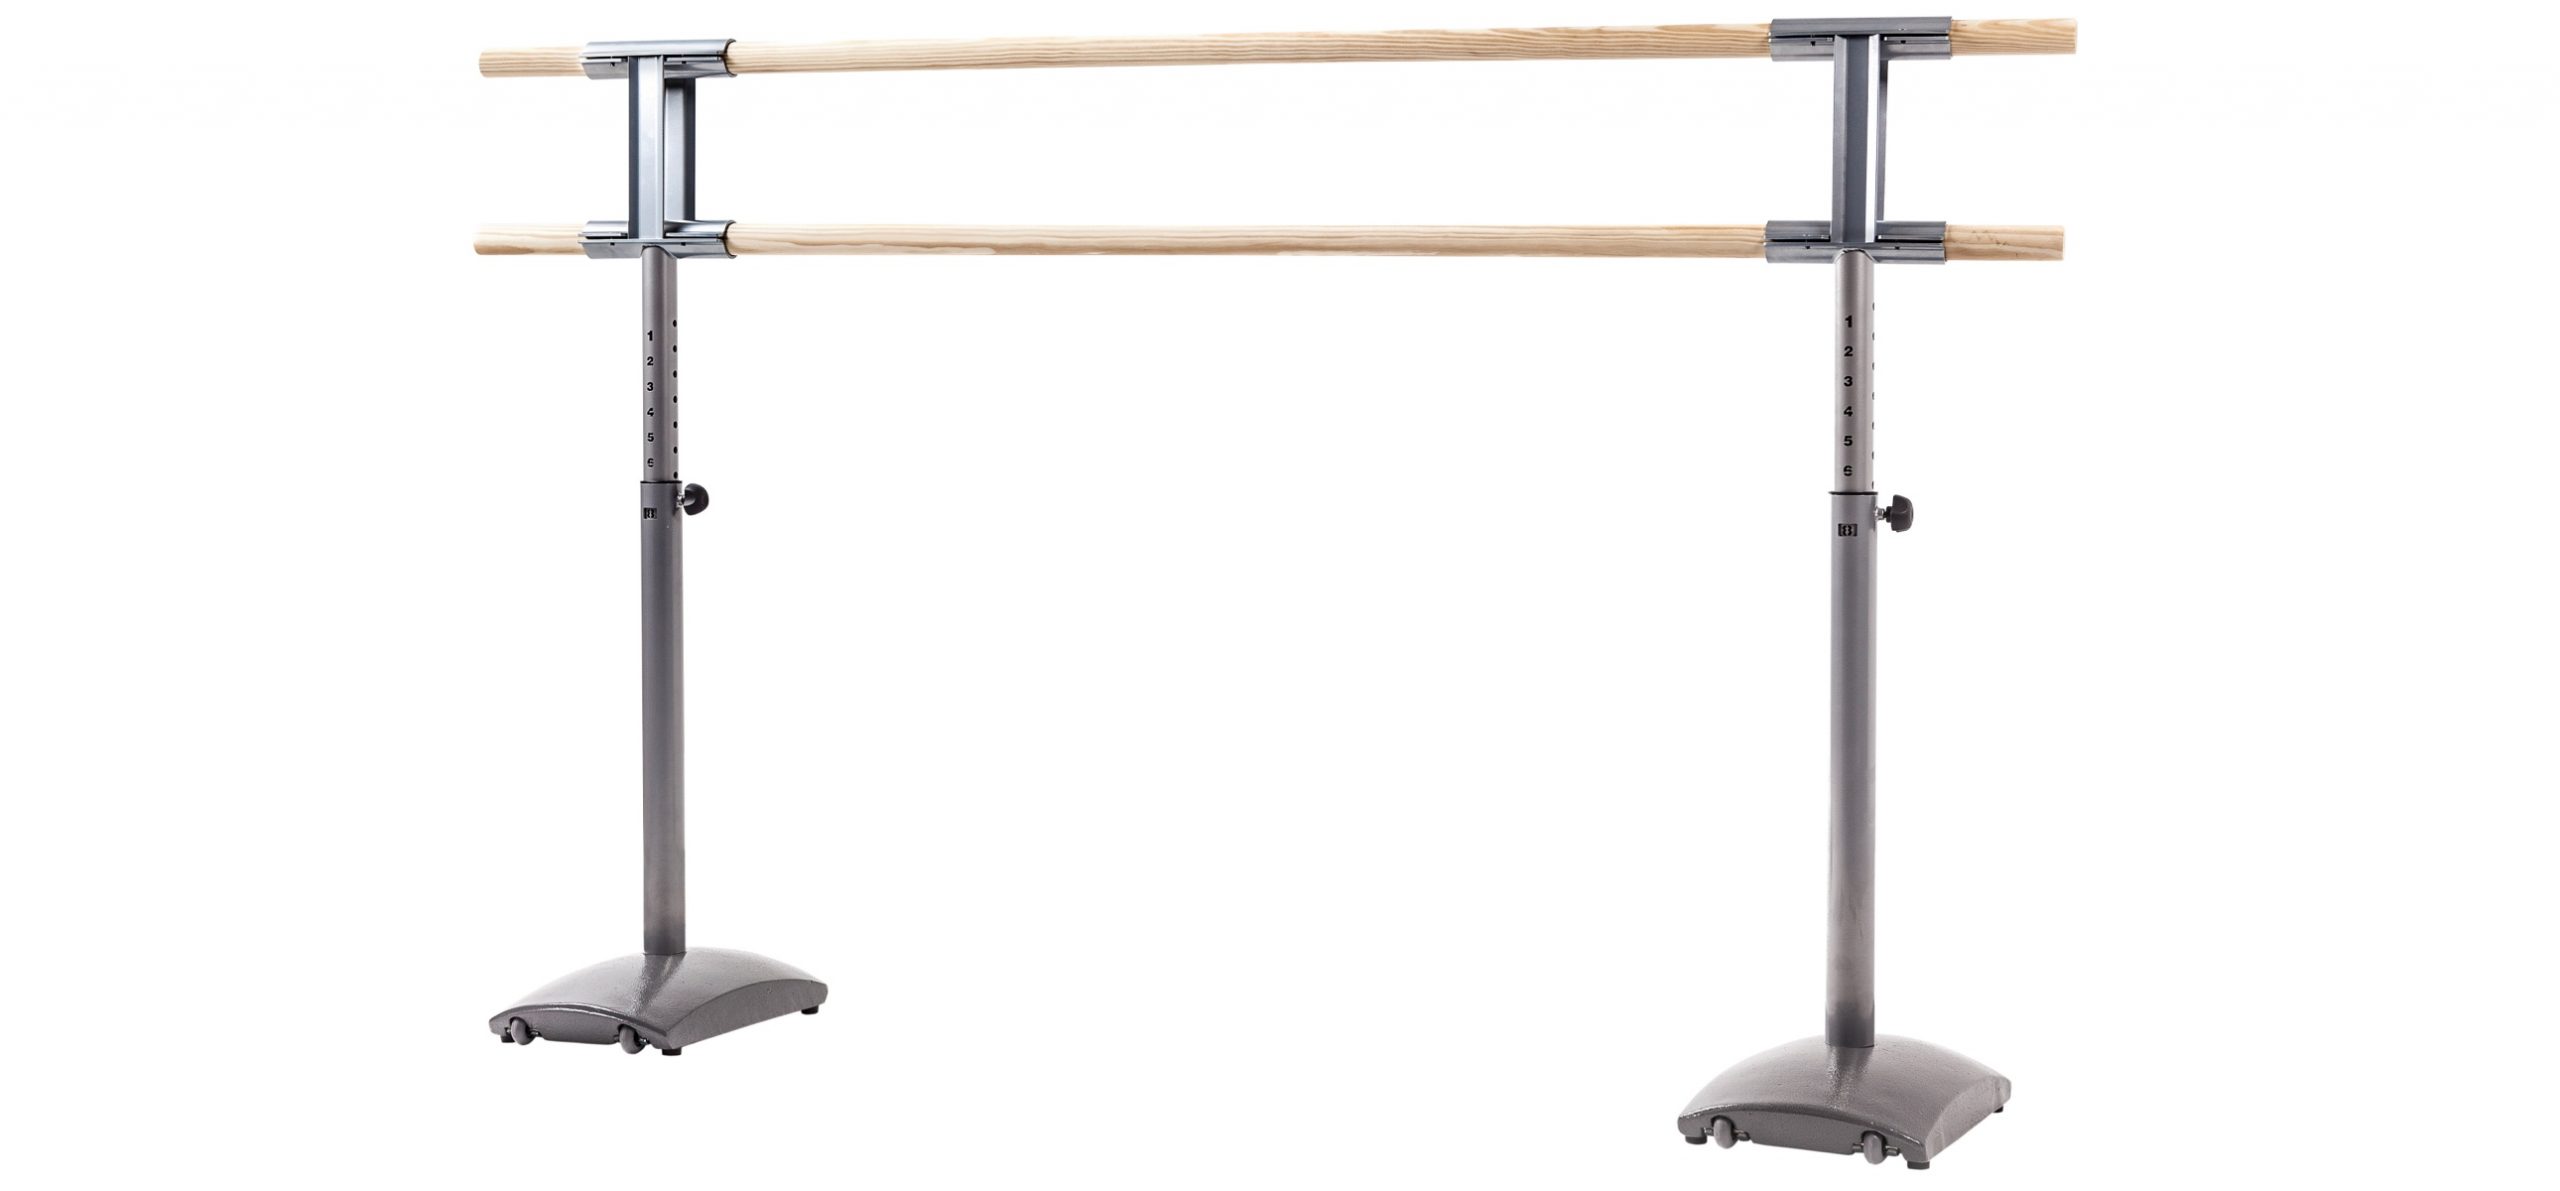 Portable Double Ballet Barre Manufacturers Suppliers Factory in China